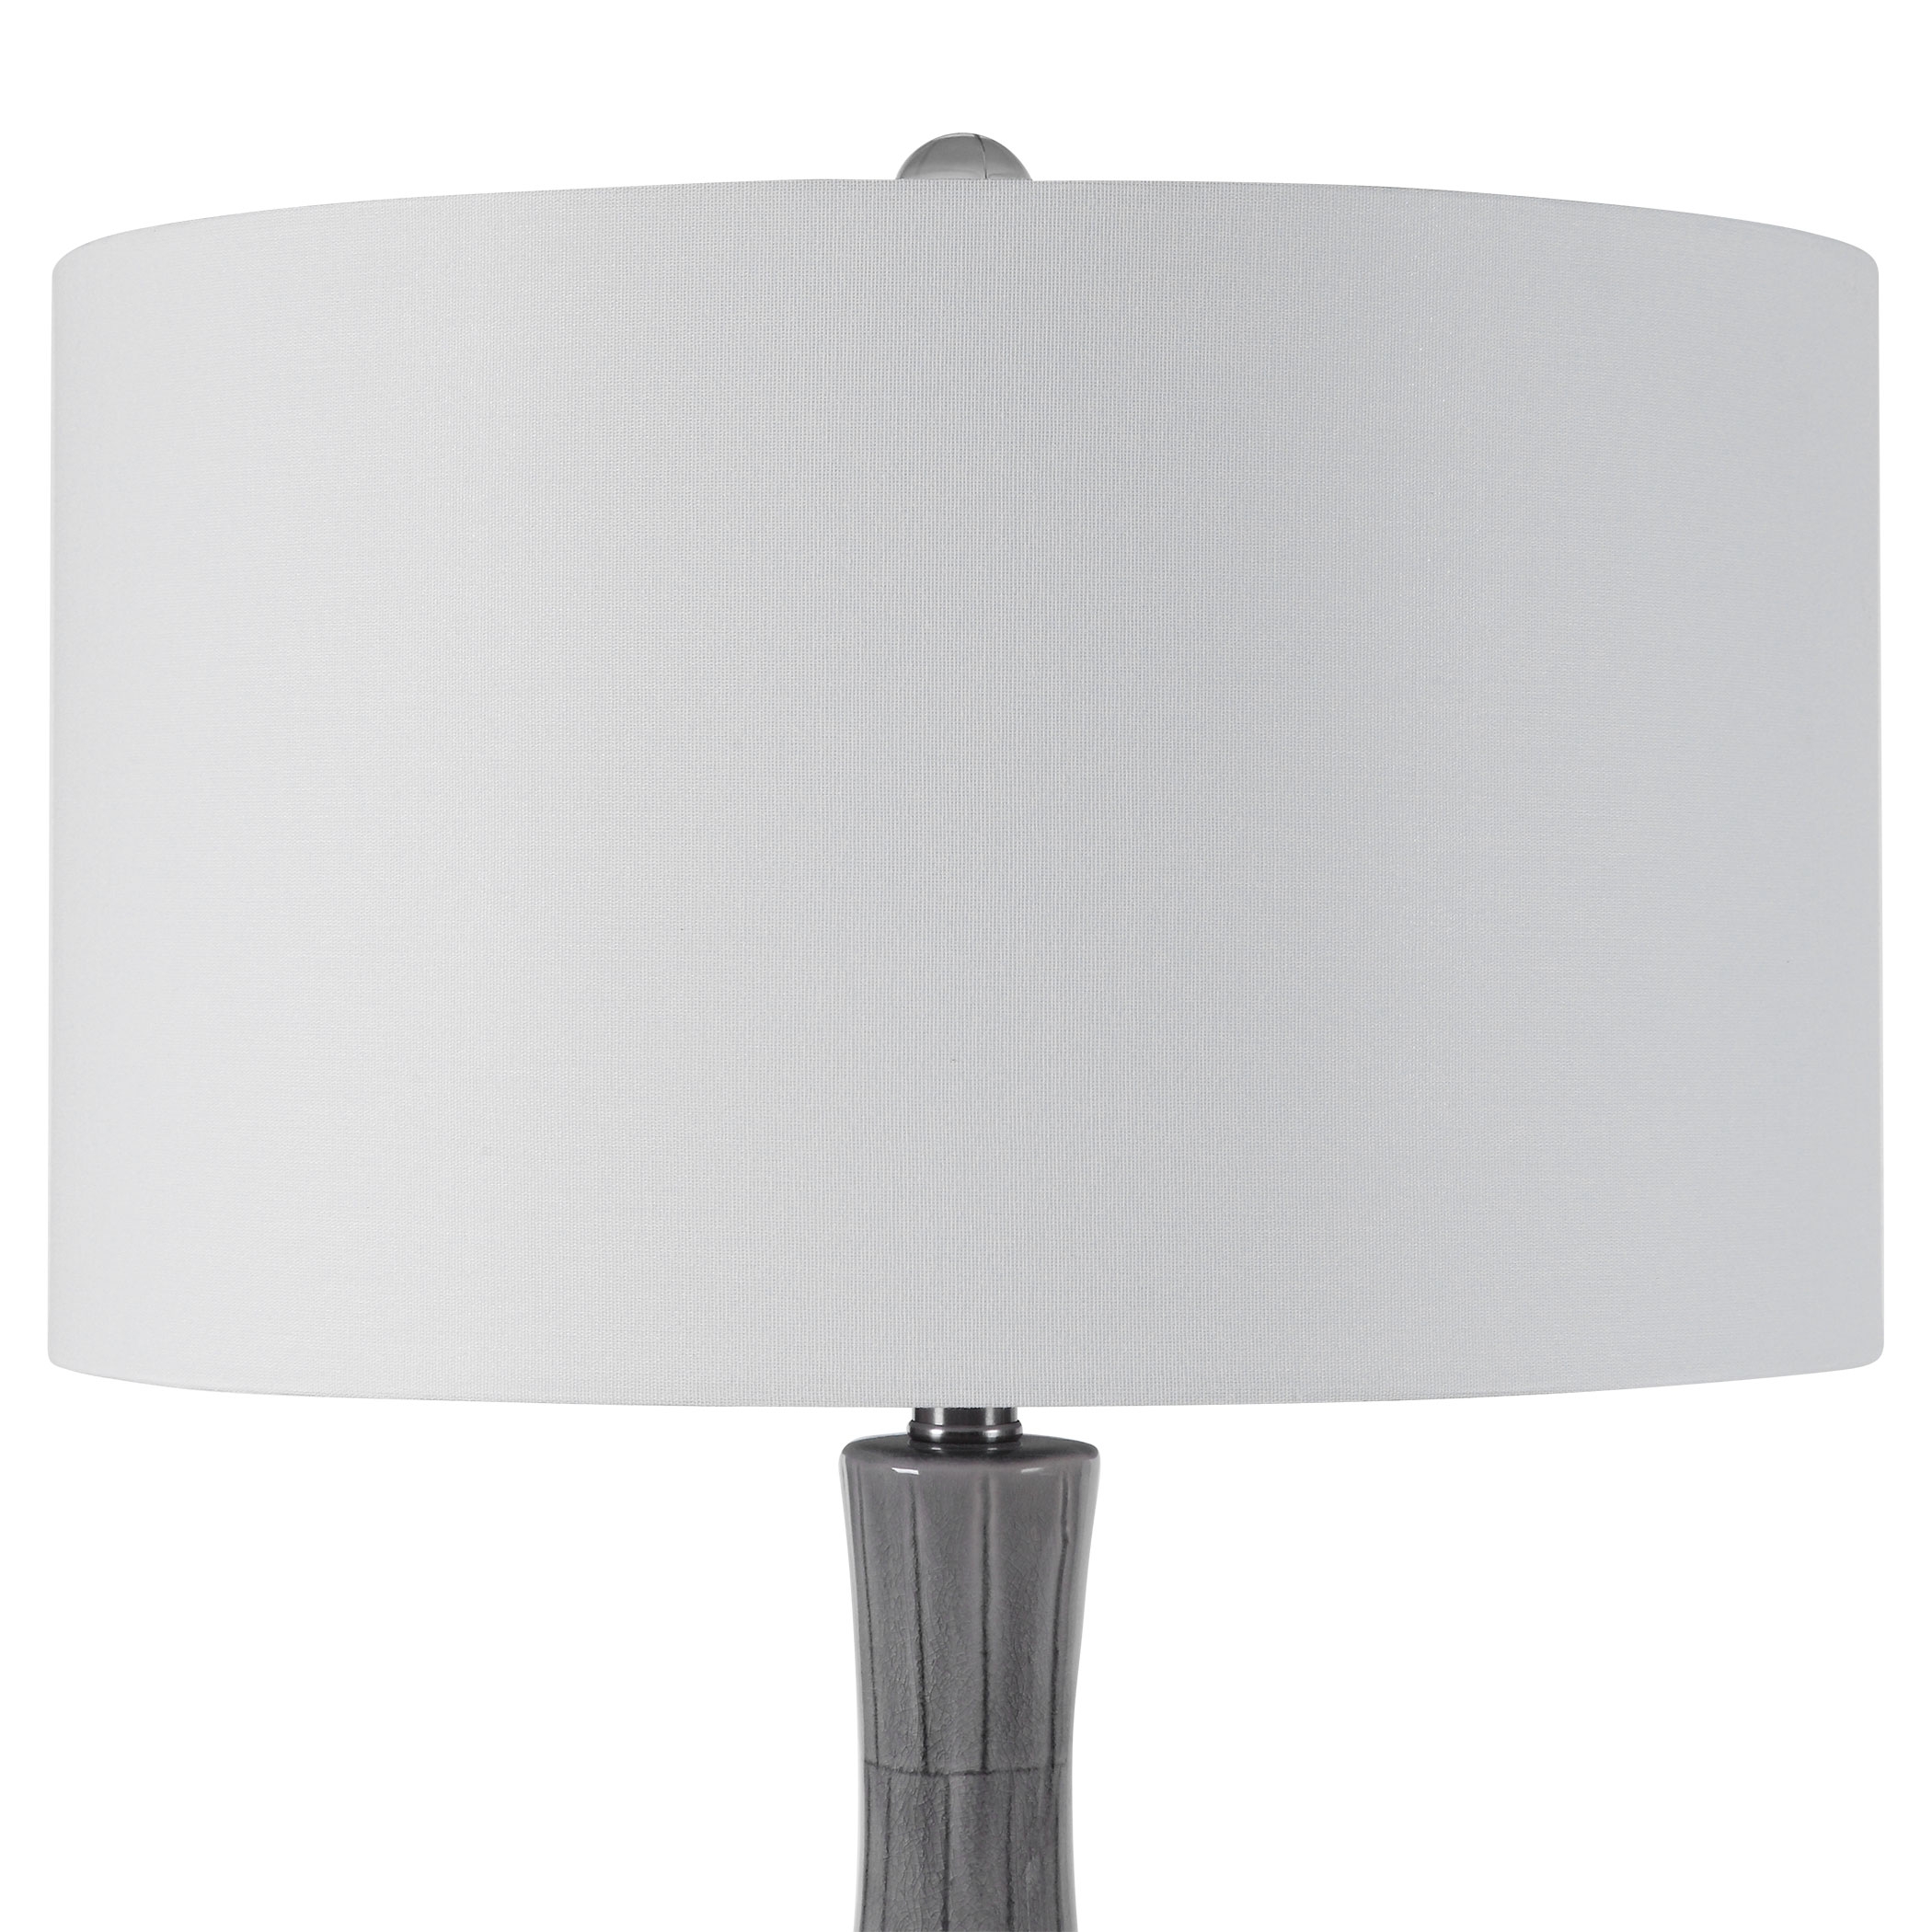 LeAnna Gray Crackle Table Lamp - Image 3